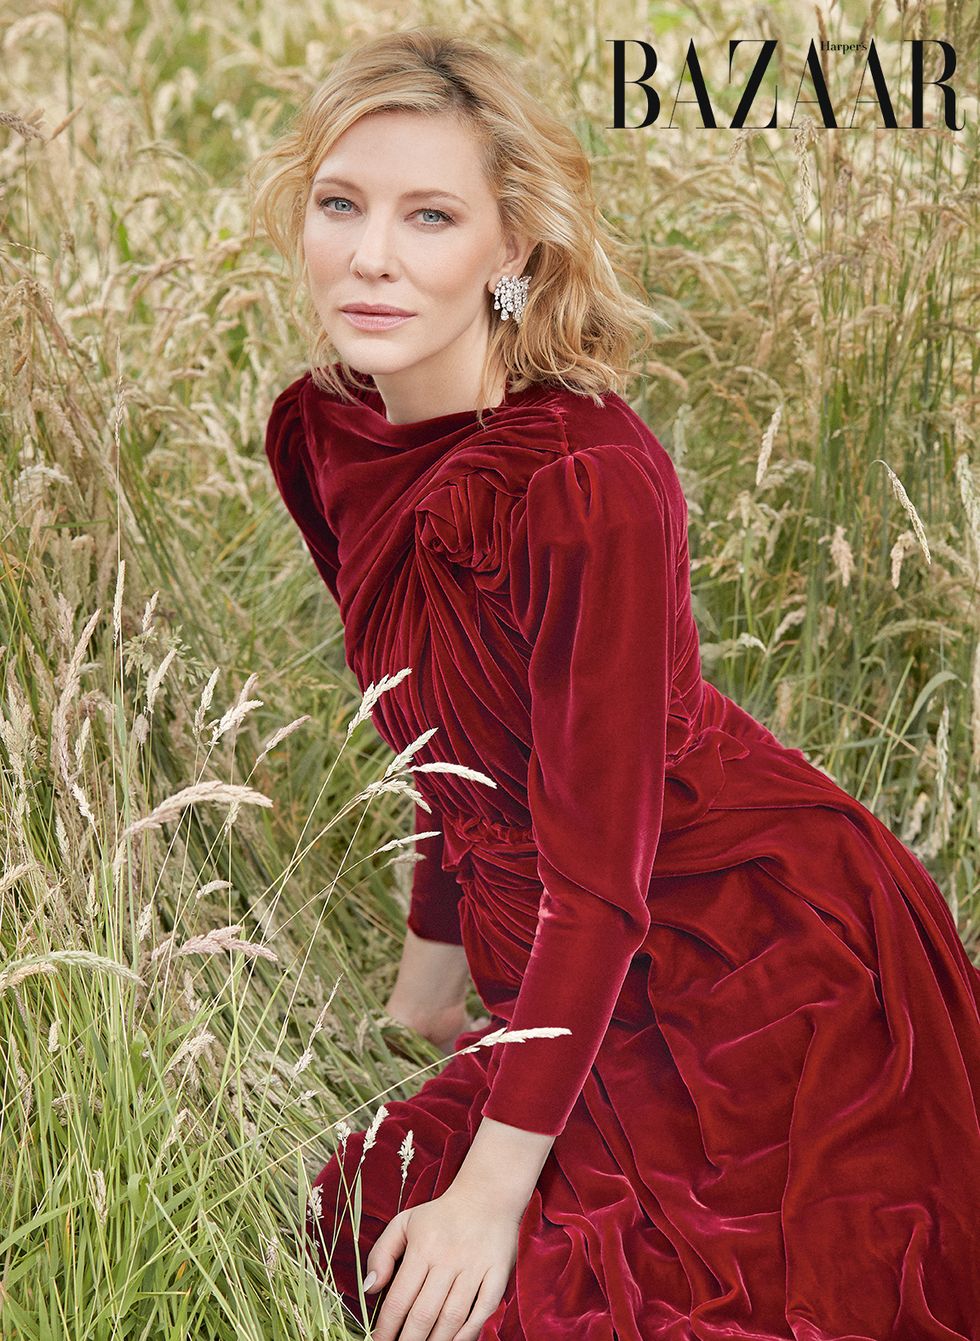 People in nature, Clothing, Red, Beauty, Grass, Dress, Blond, Grass family, Photo shoot, Outerwear, 